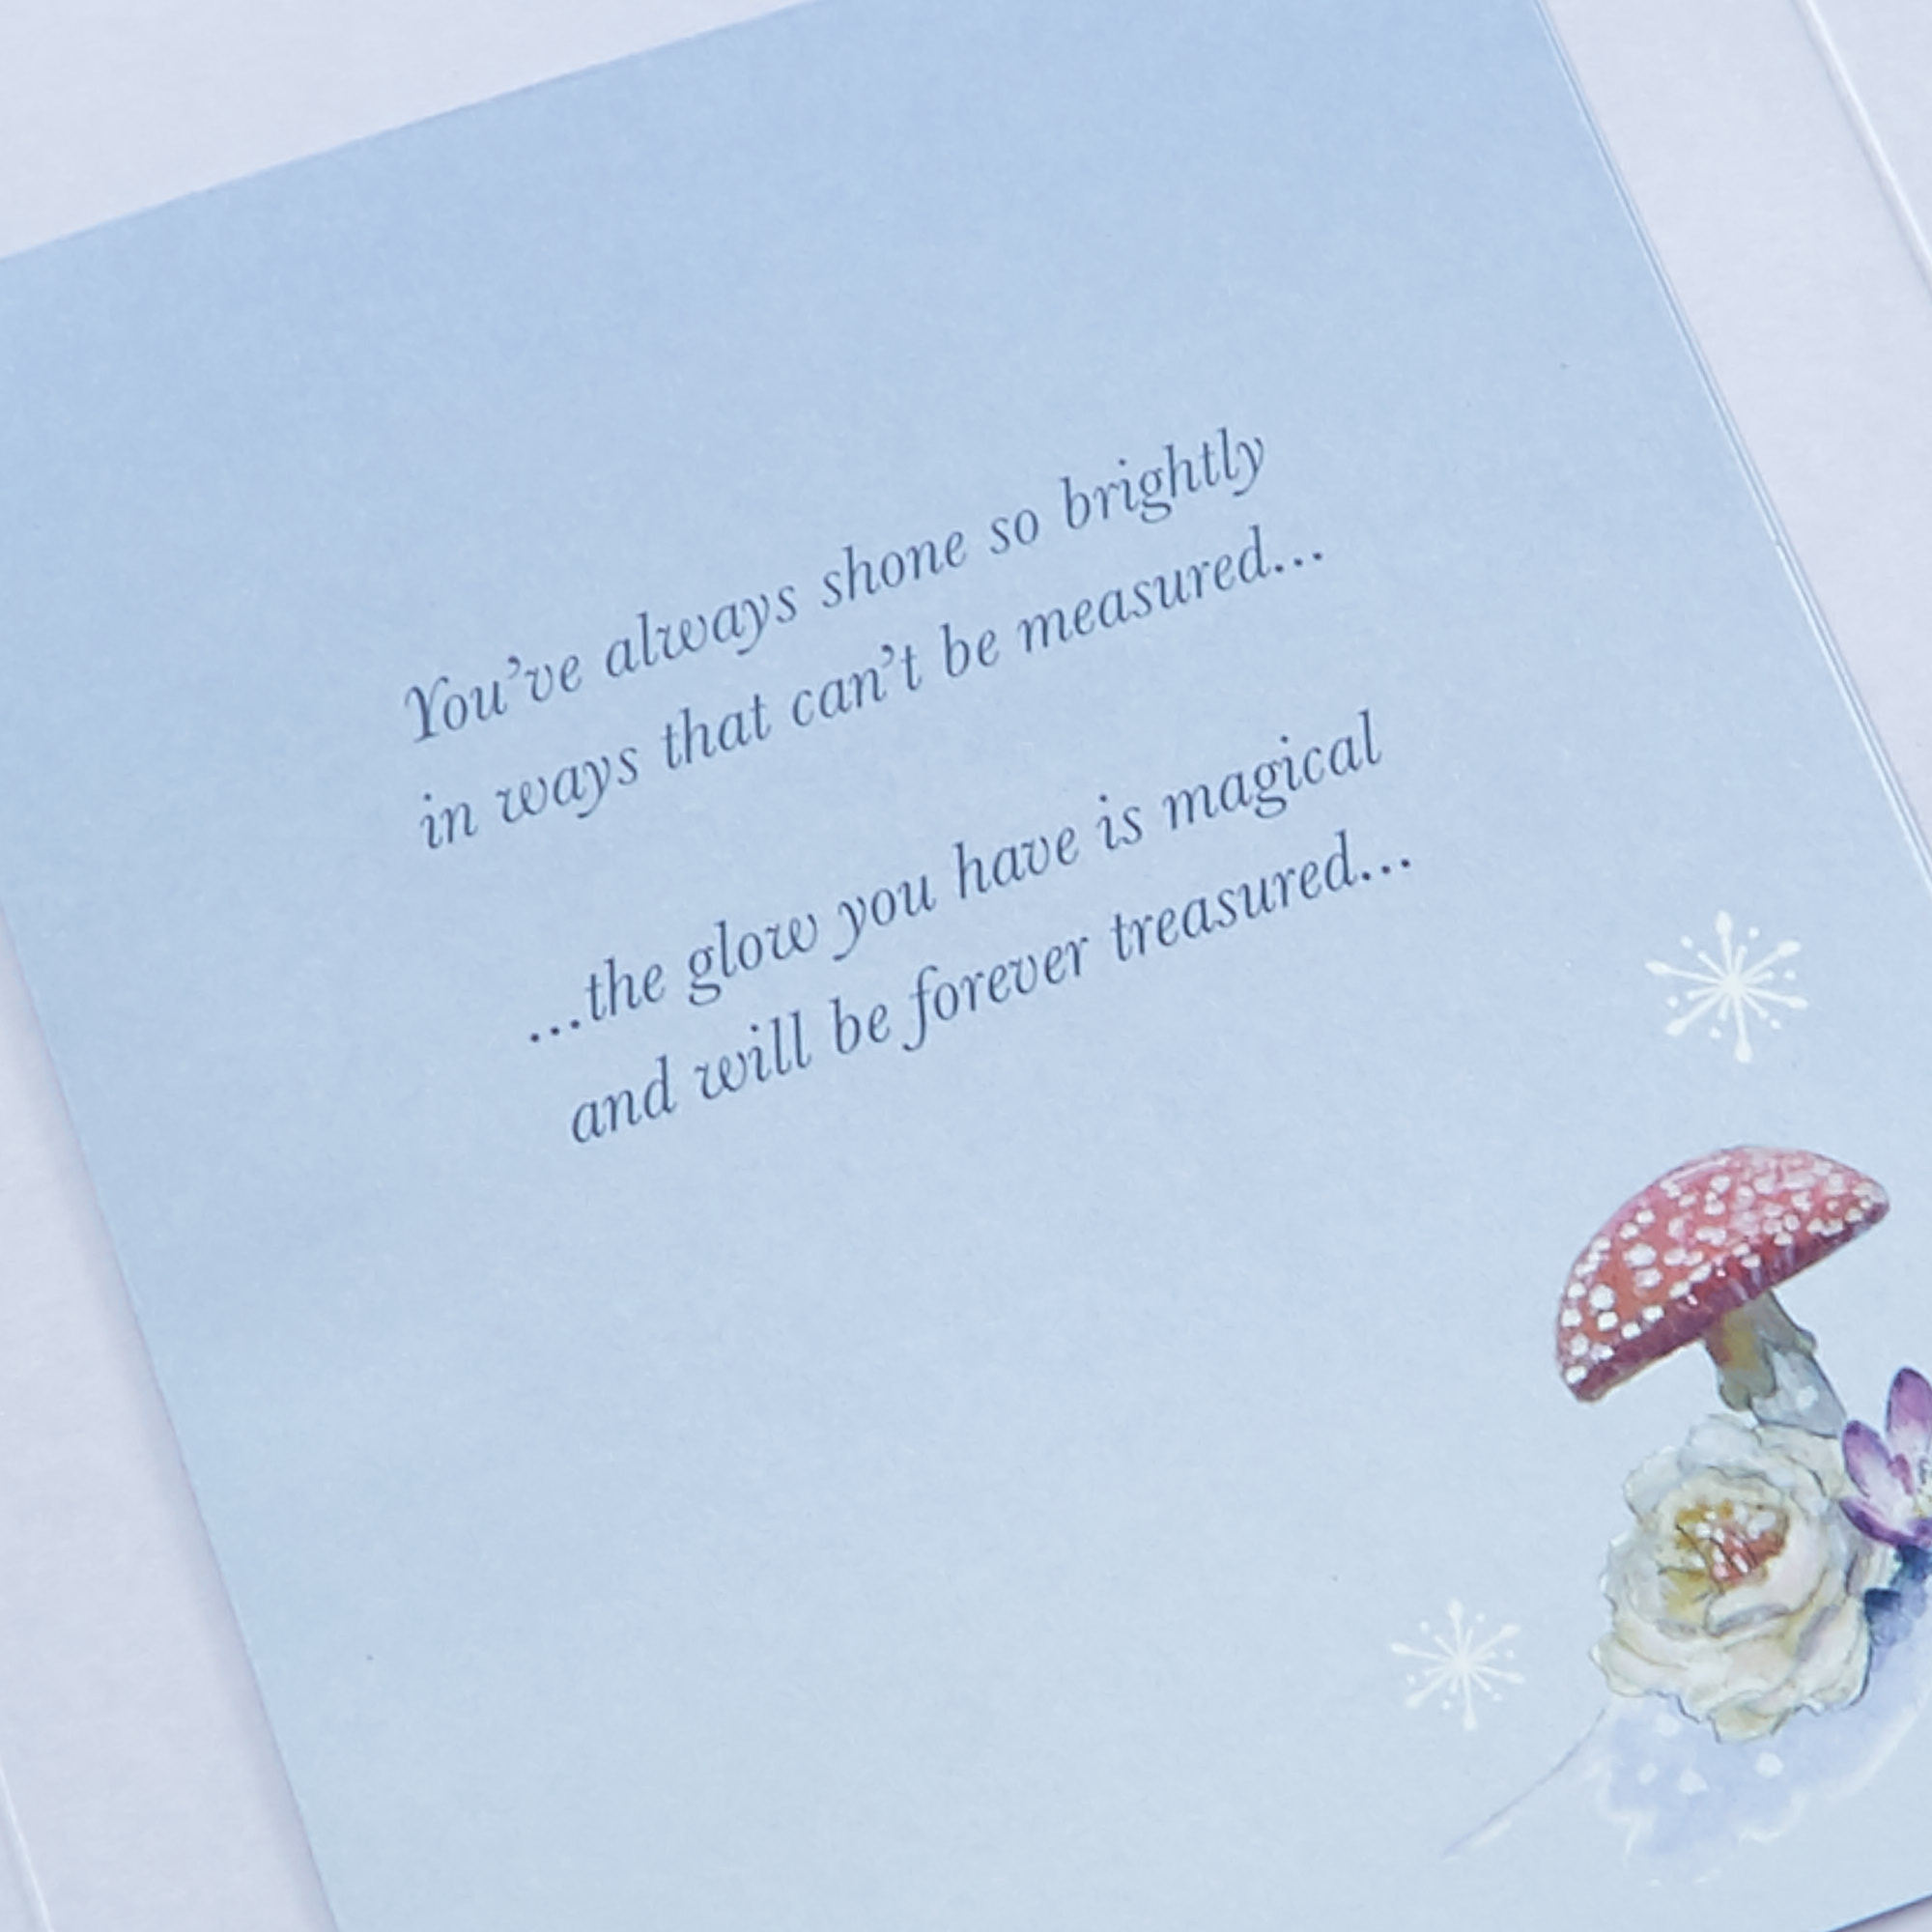 Christmas Card - For A Much Loved Daughter